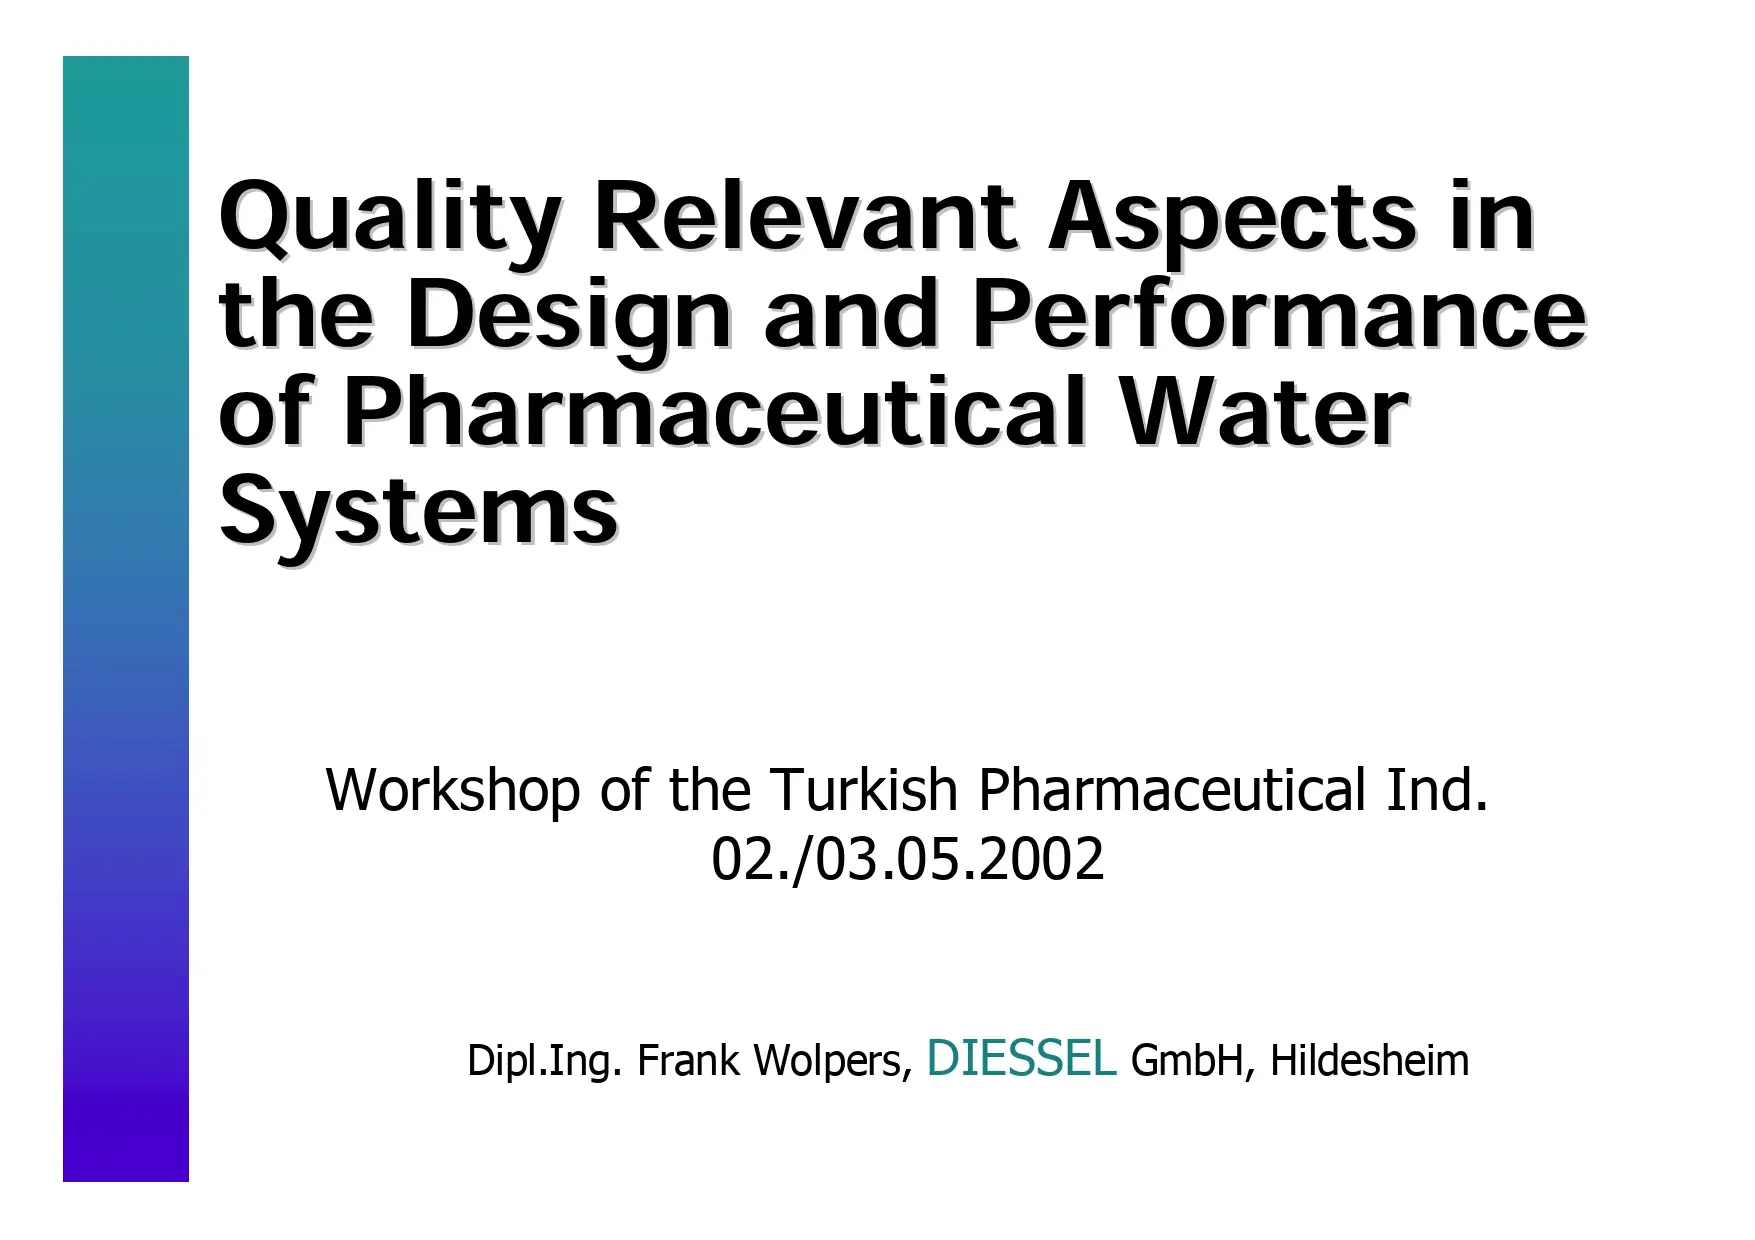 Quality Relevant Aspects in the Design and Performance of Pharmaceutical Water Systems